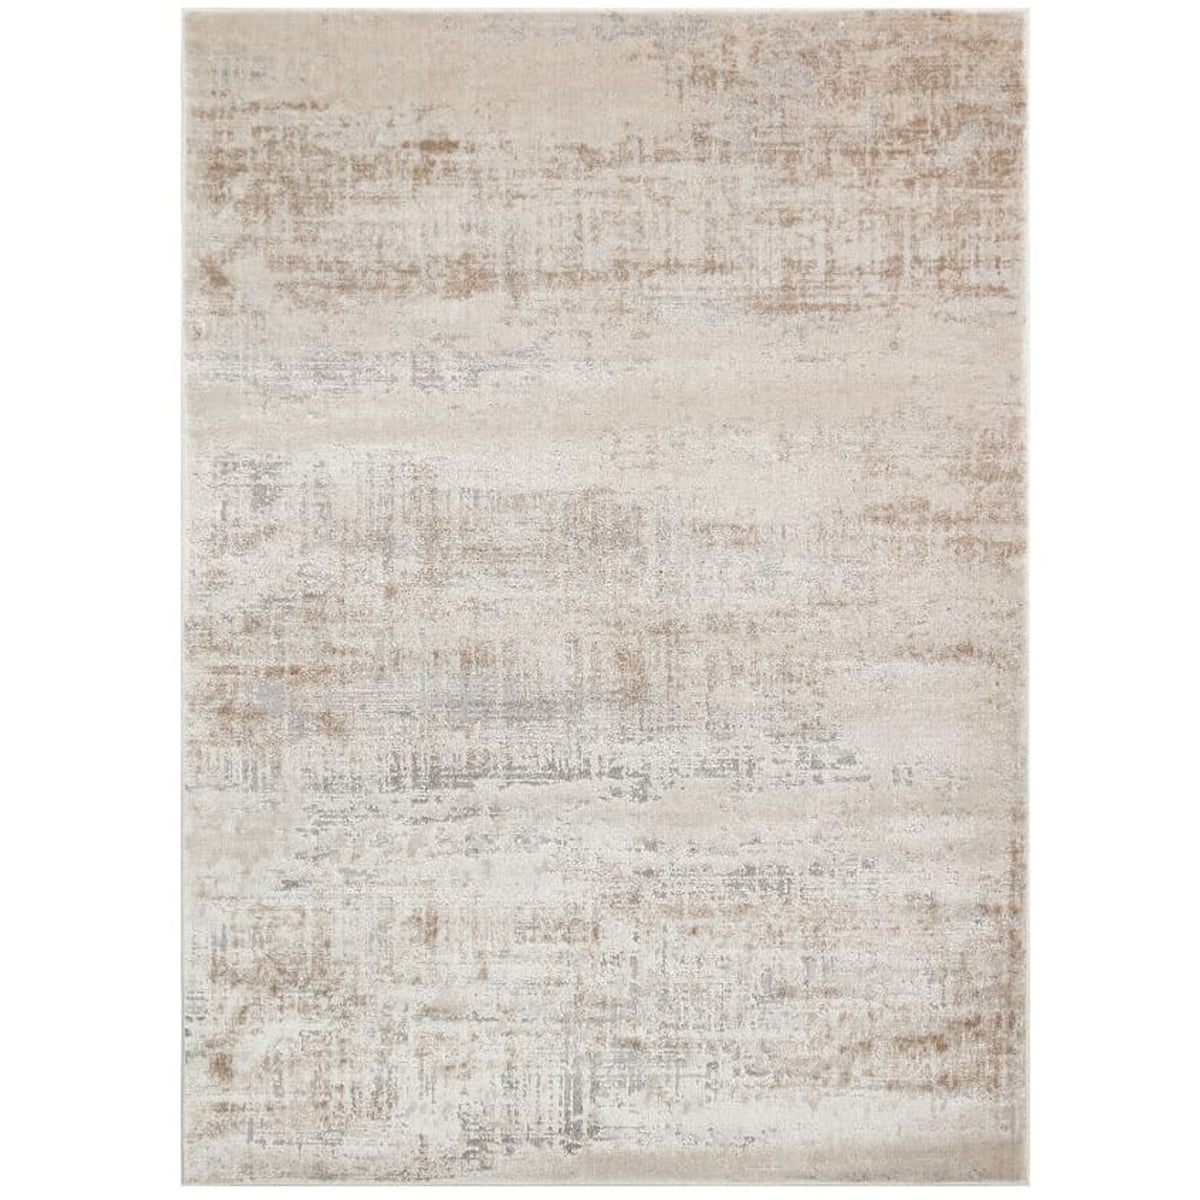 Luzon Rug, Ivory & Taupe